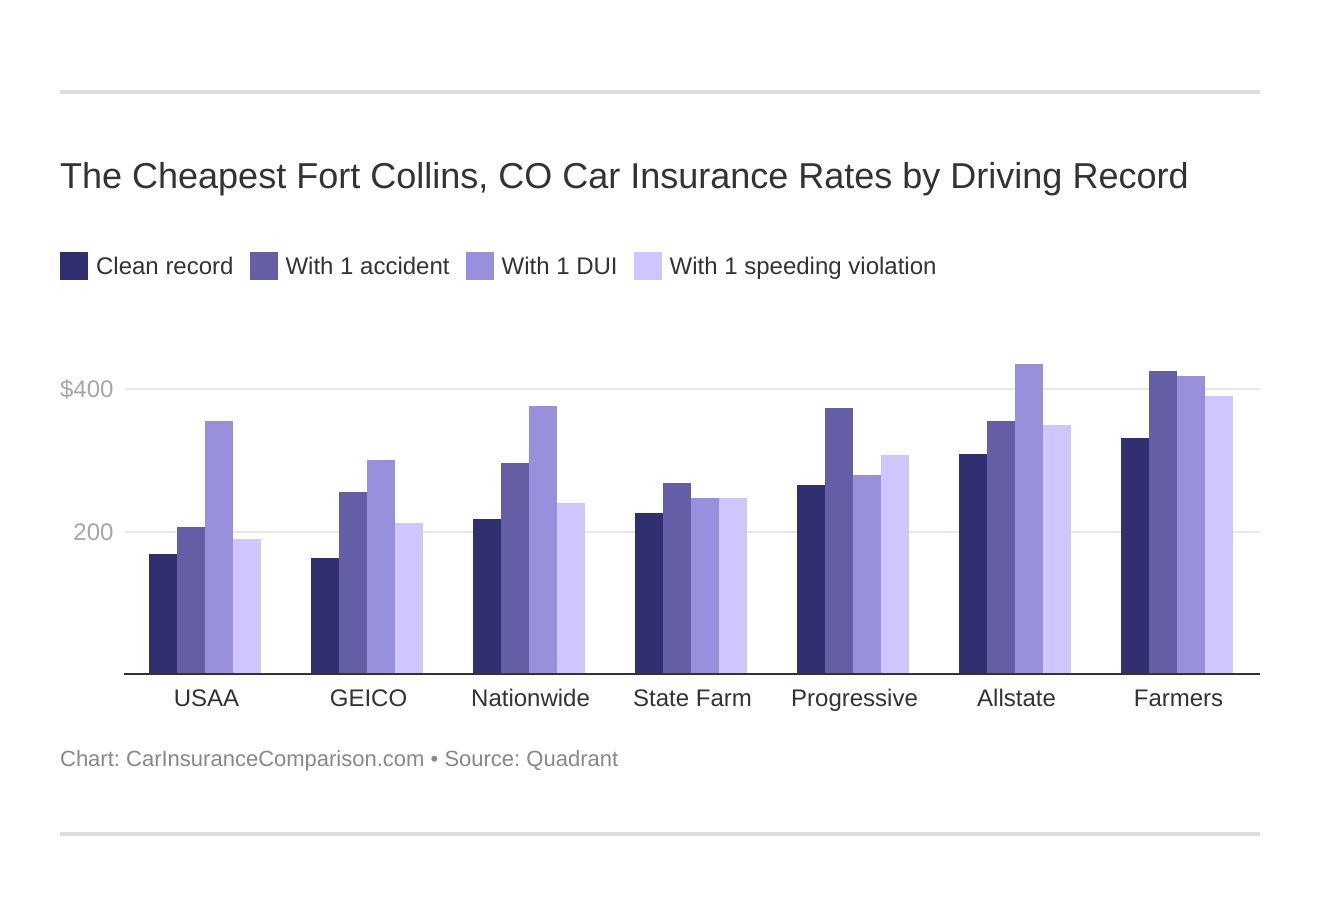 The Cheapest Fort Collins, CO Car Insurance Rates by Driving Record